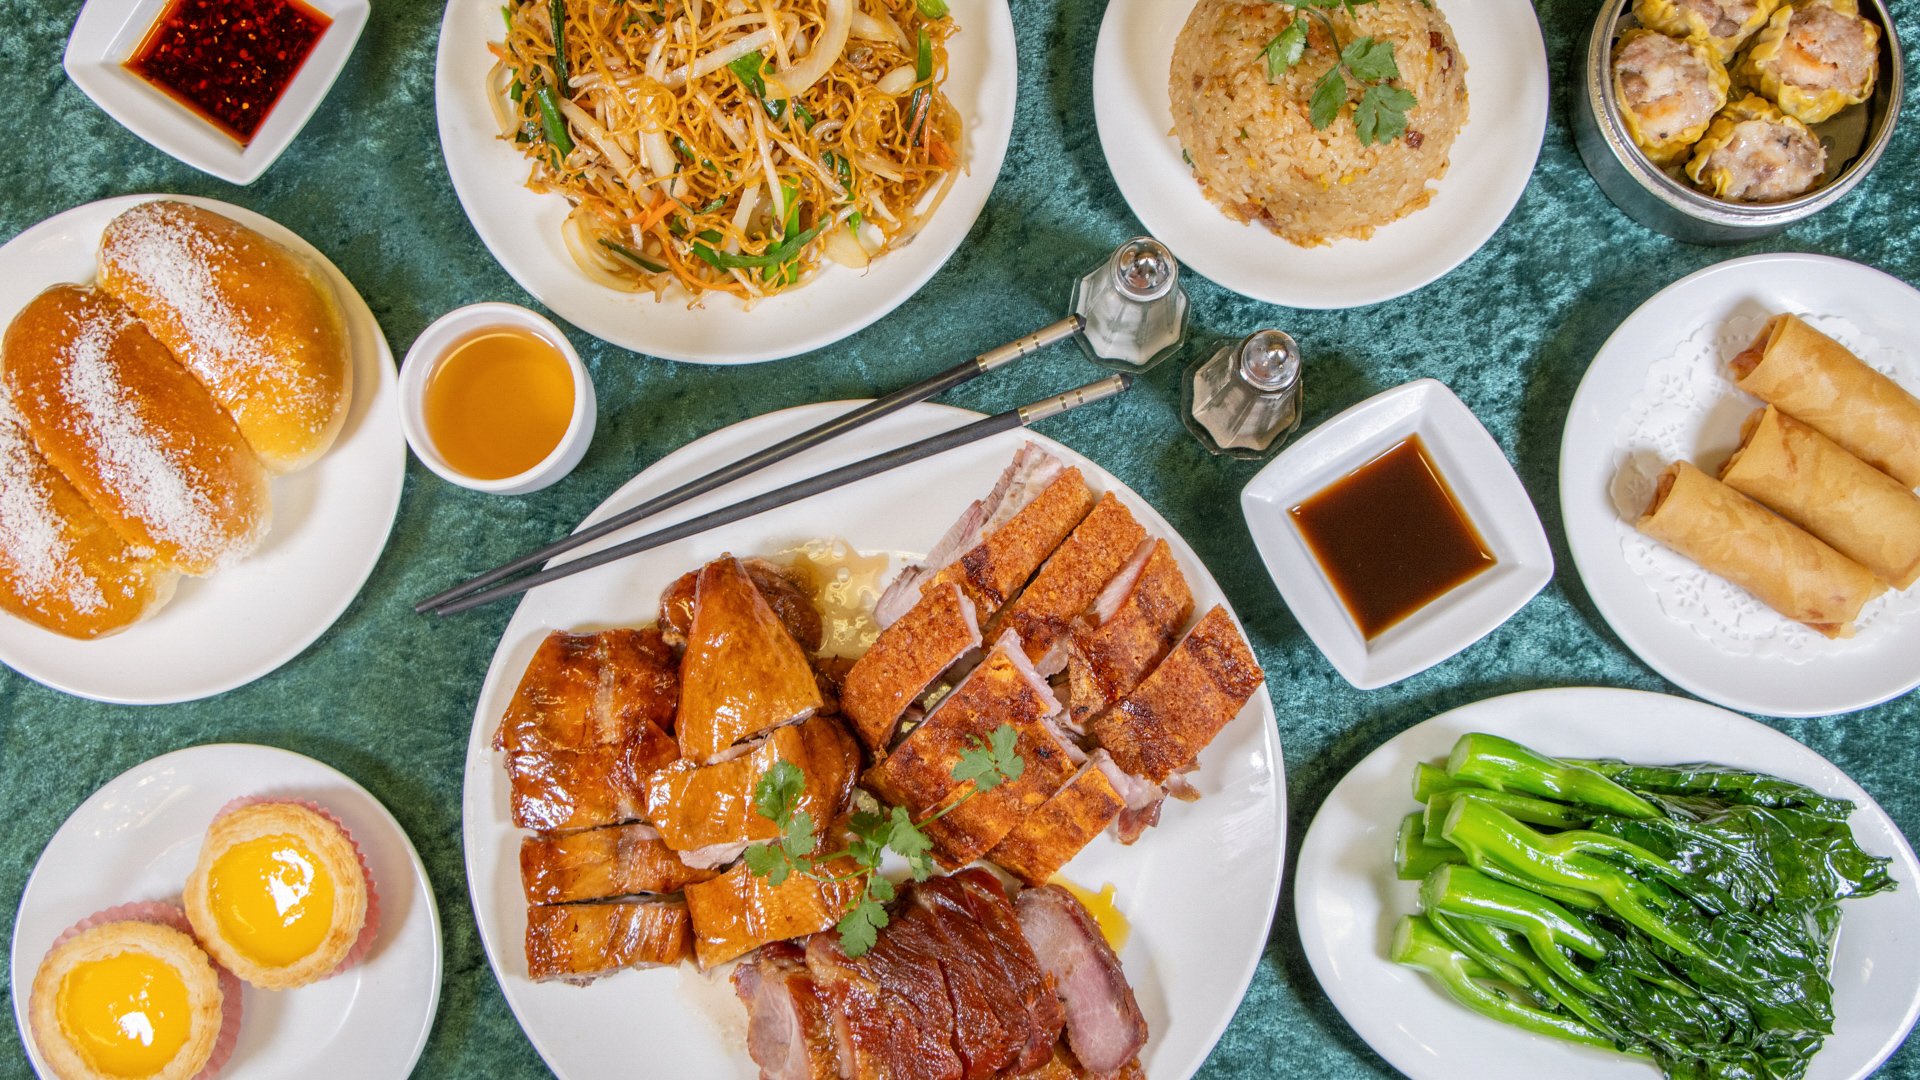 Choices, choices, and more delicious choices. If you enjoy authentic Chinese Dim Sum look no further than Mekong Palace in Mesa, Arizona! Sterling Media is proud to have photographed many of their menu items for DoorDash! Get it delivered, or go chec